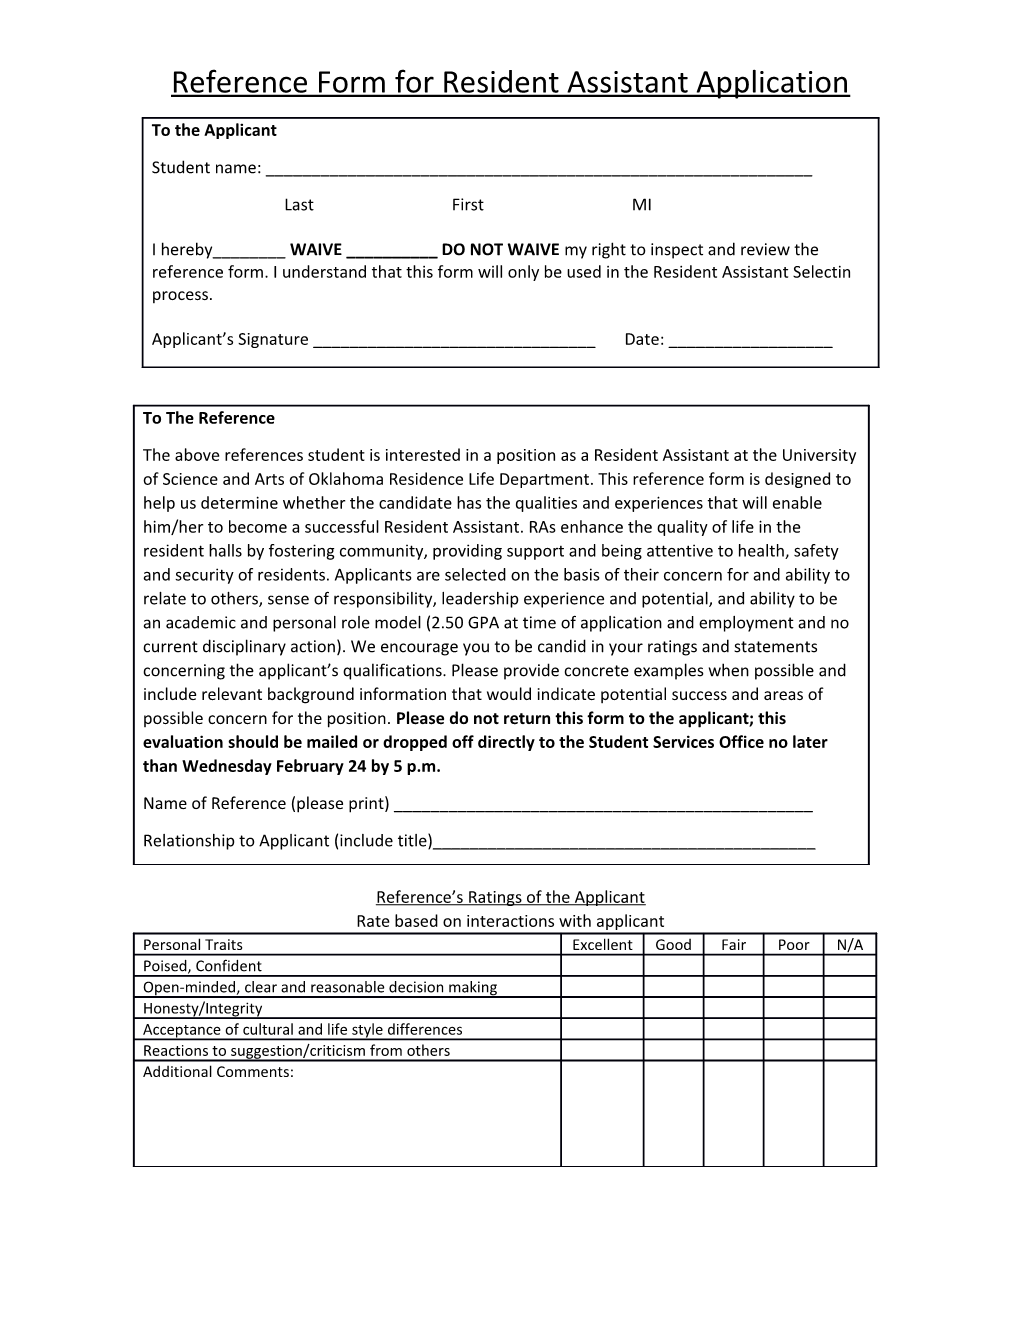 Reference Form for Resident Assistant Application